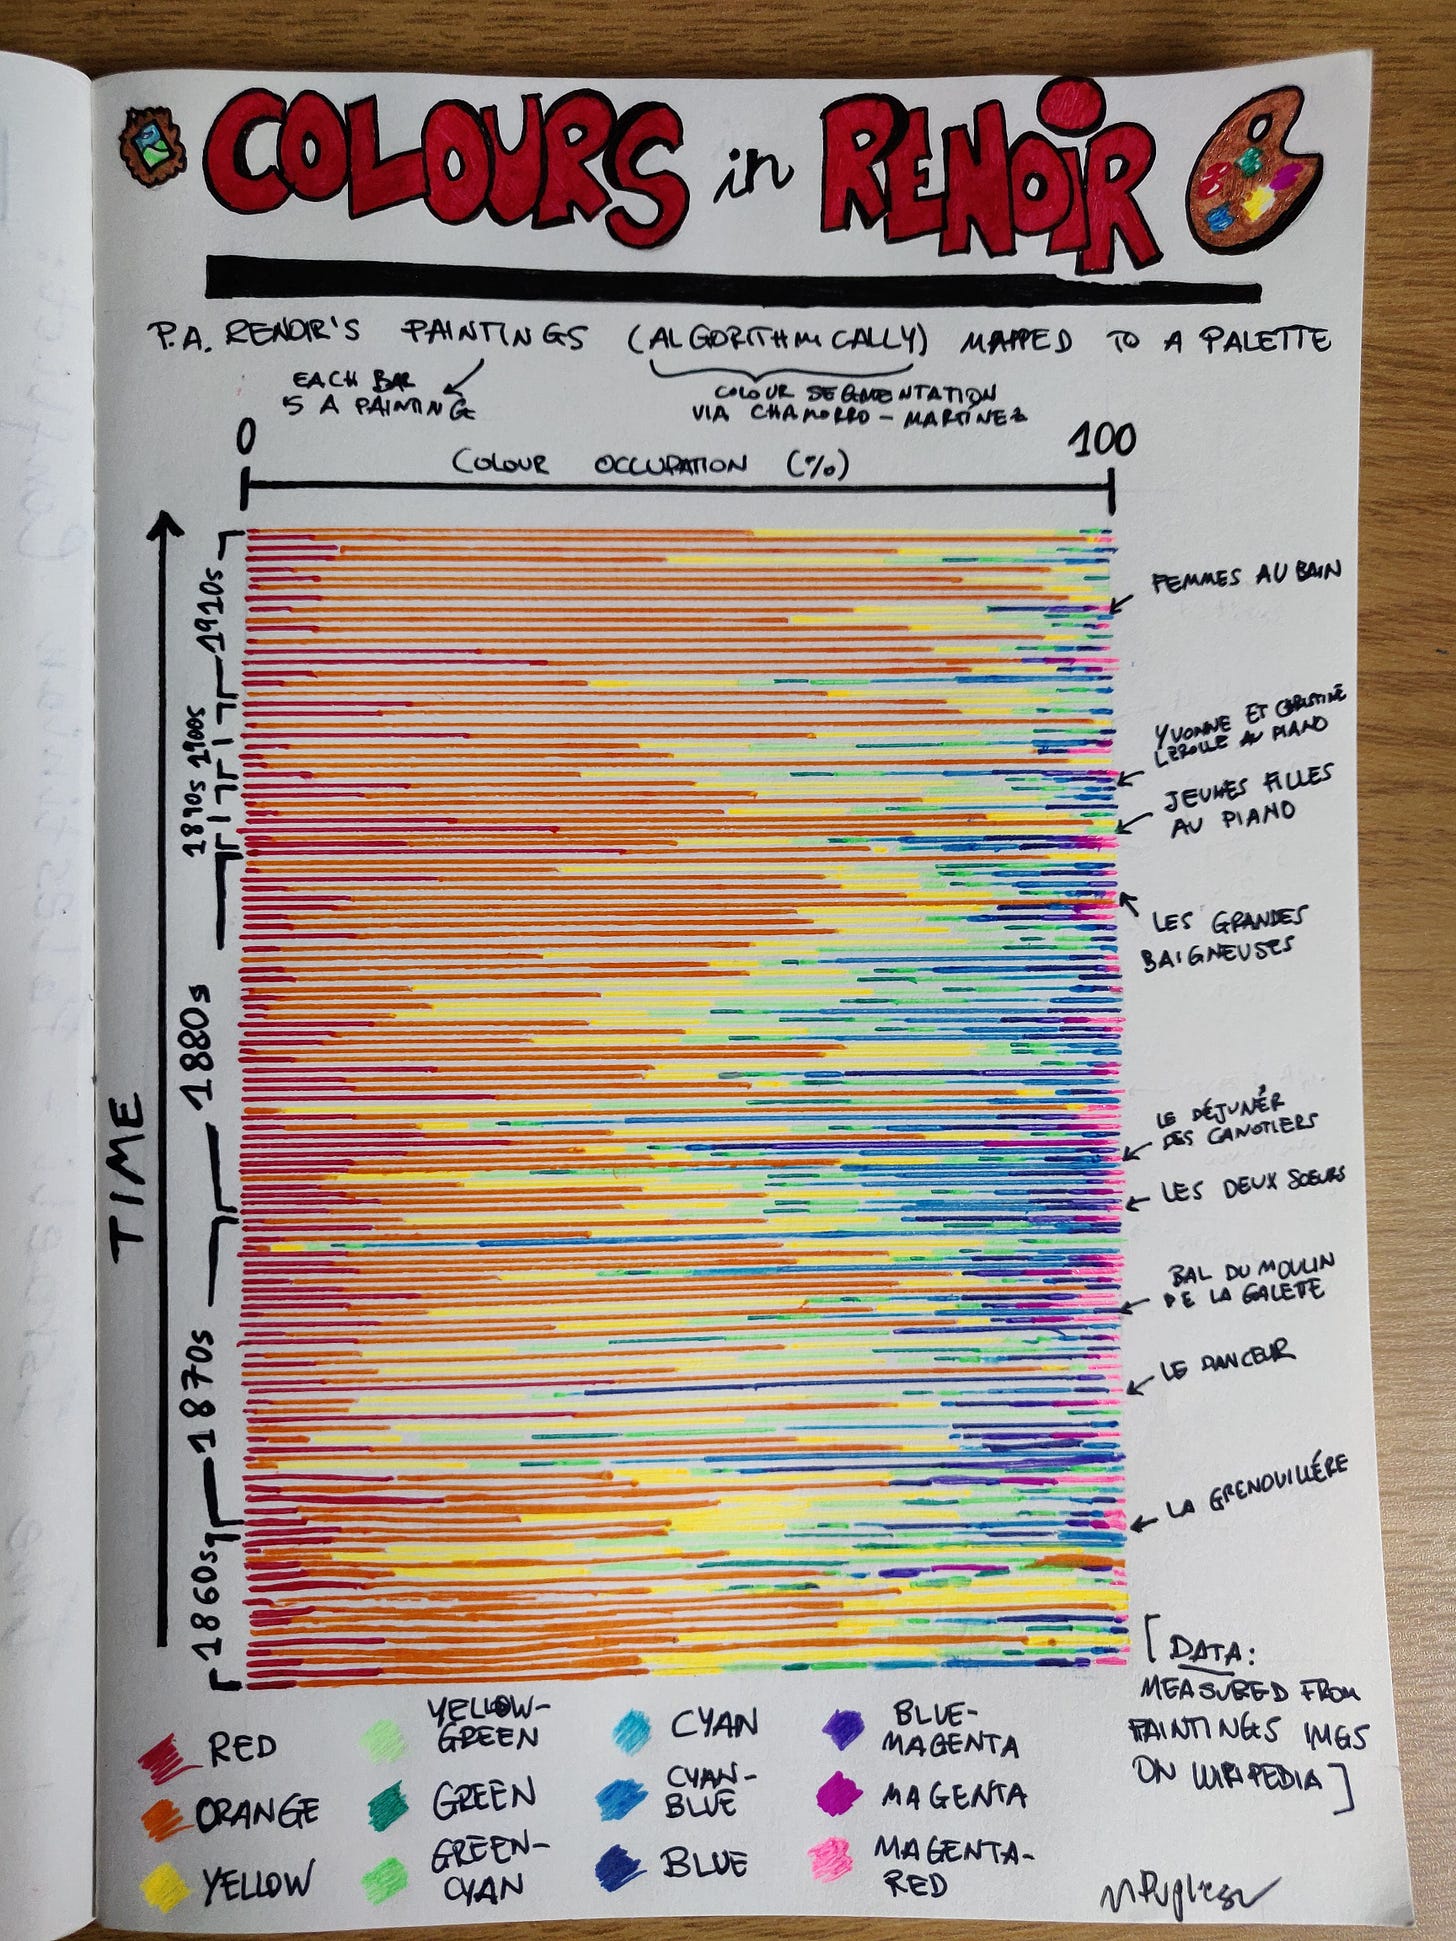 Renoir's colours in a data visualisation